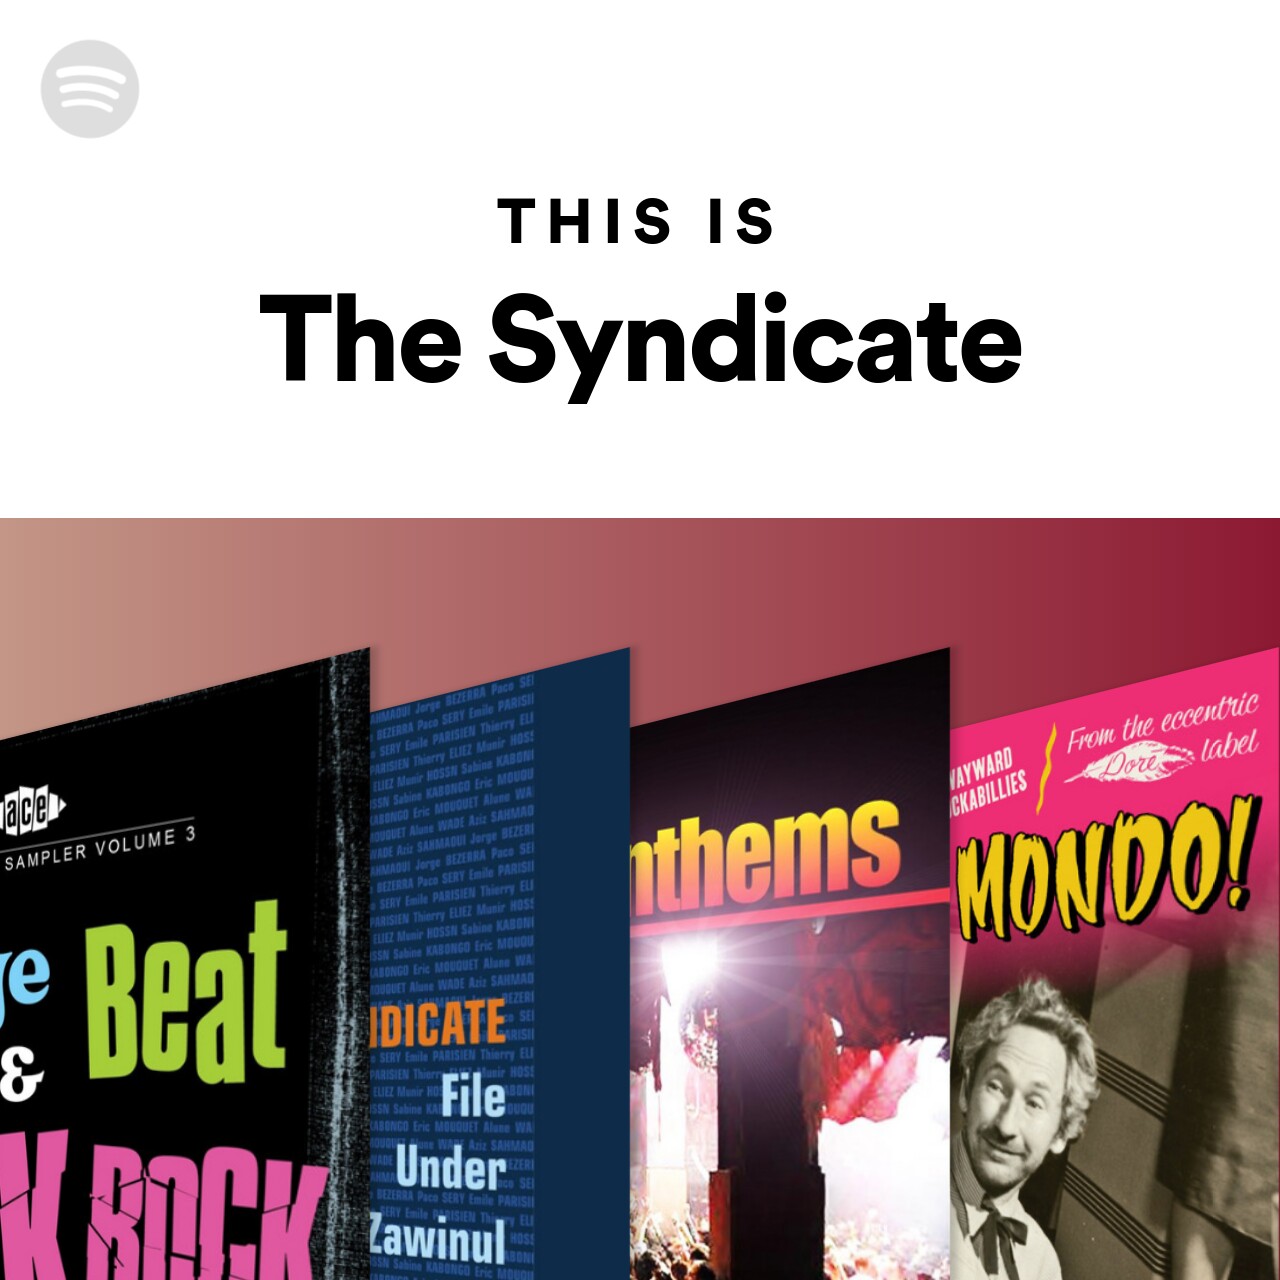 This Is The Syndicate